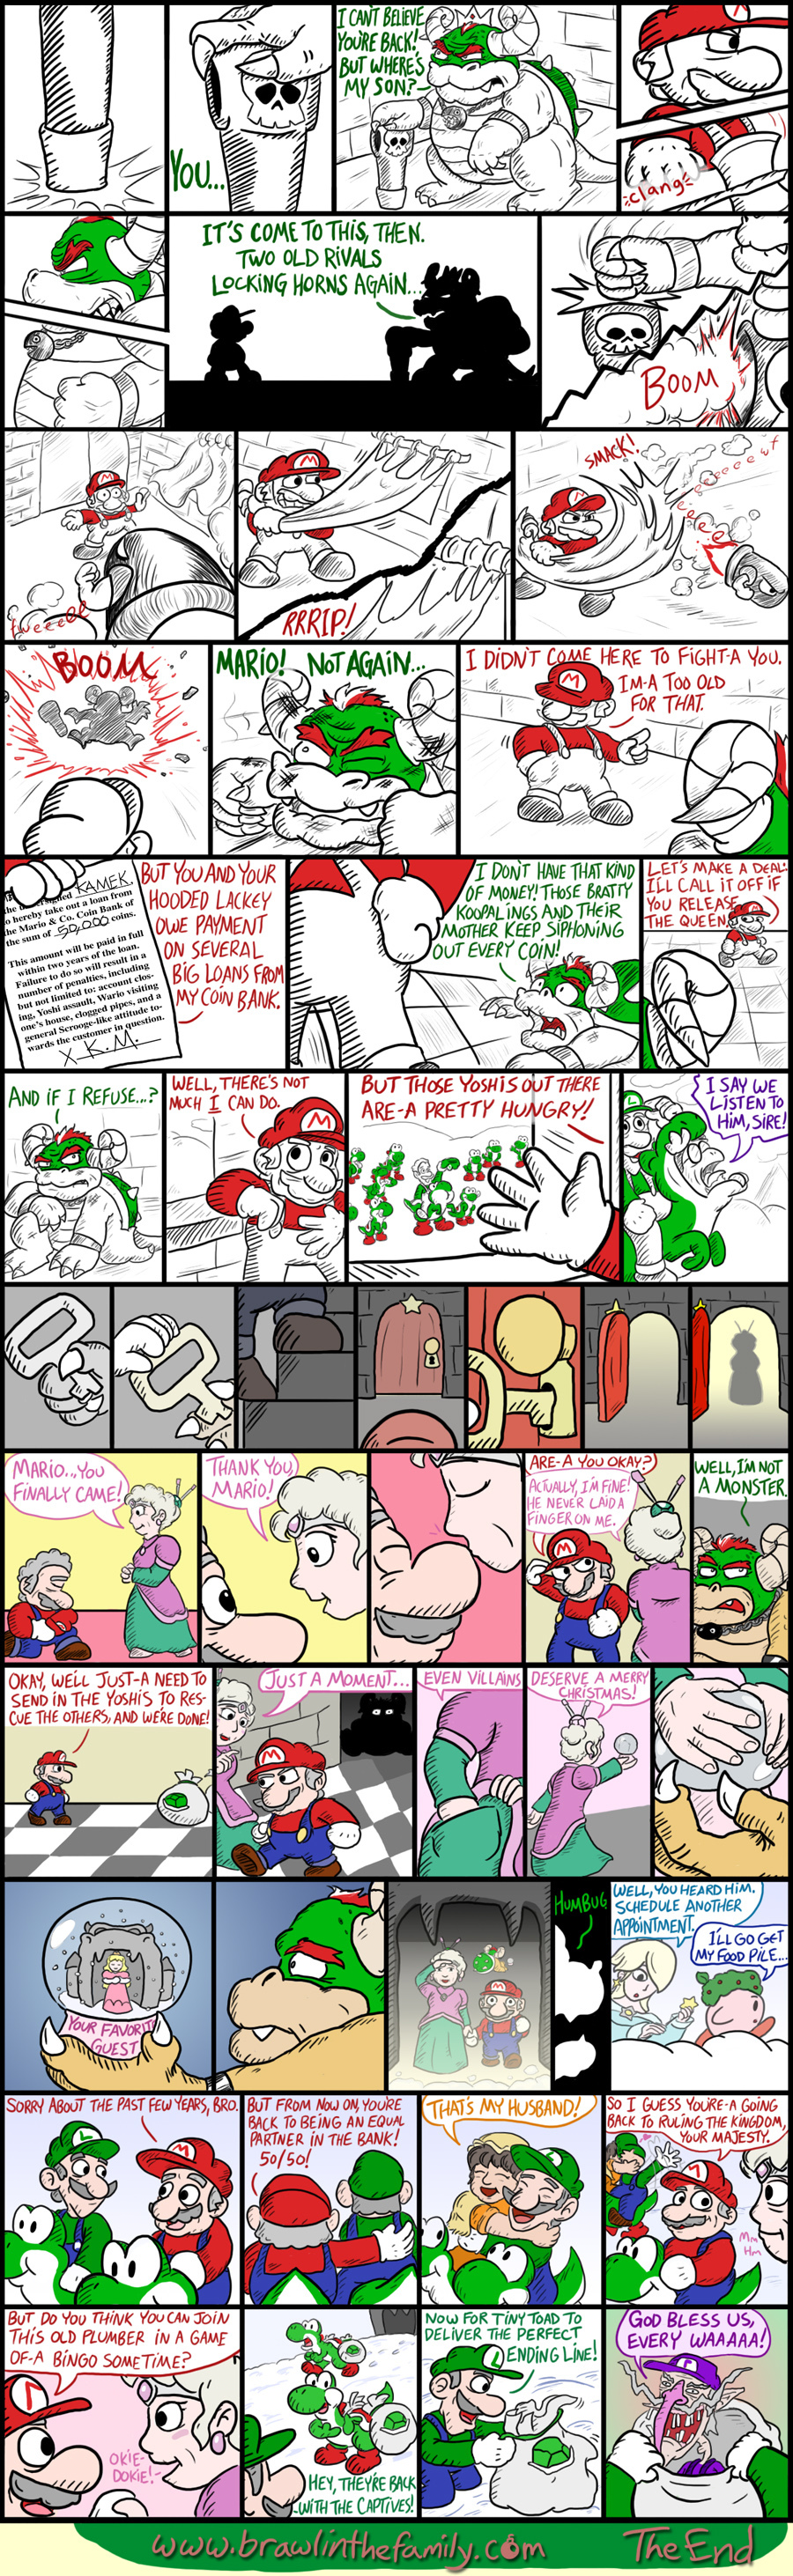 It's curtains for Bowser